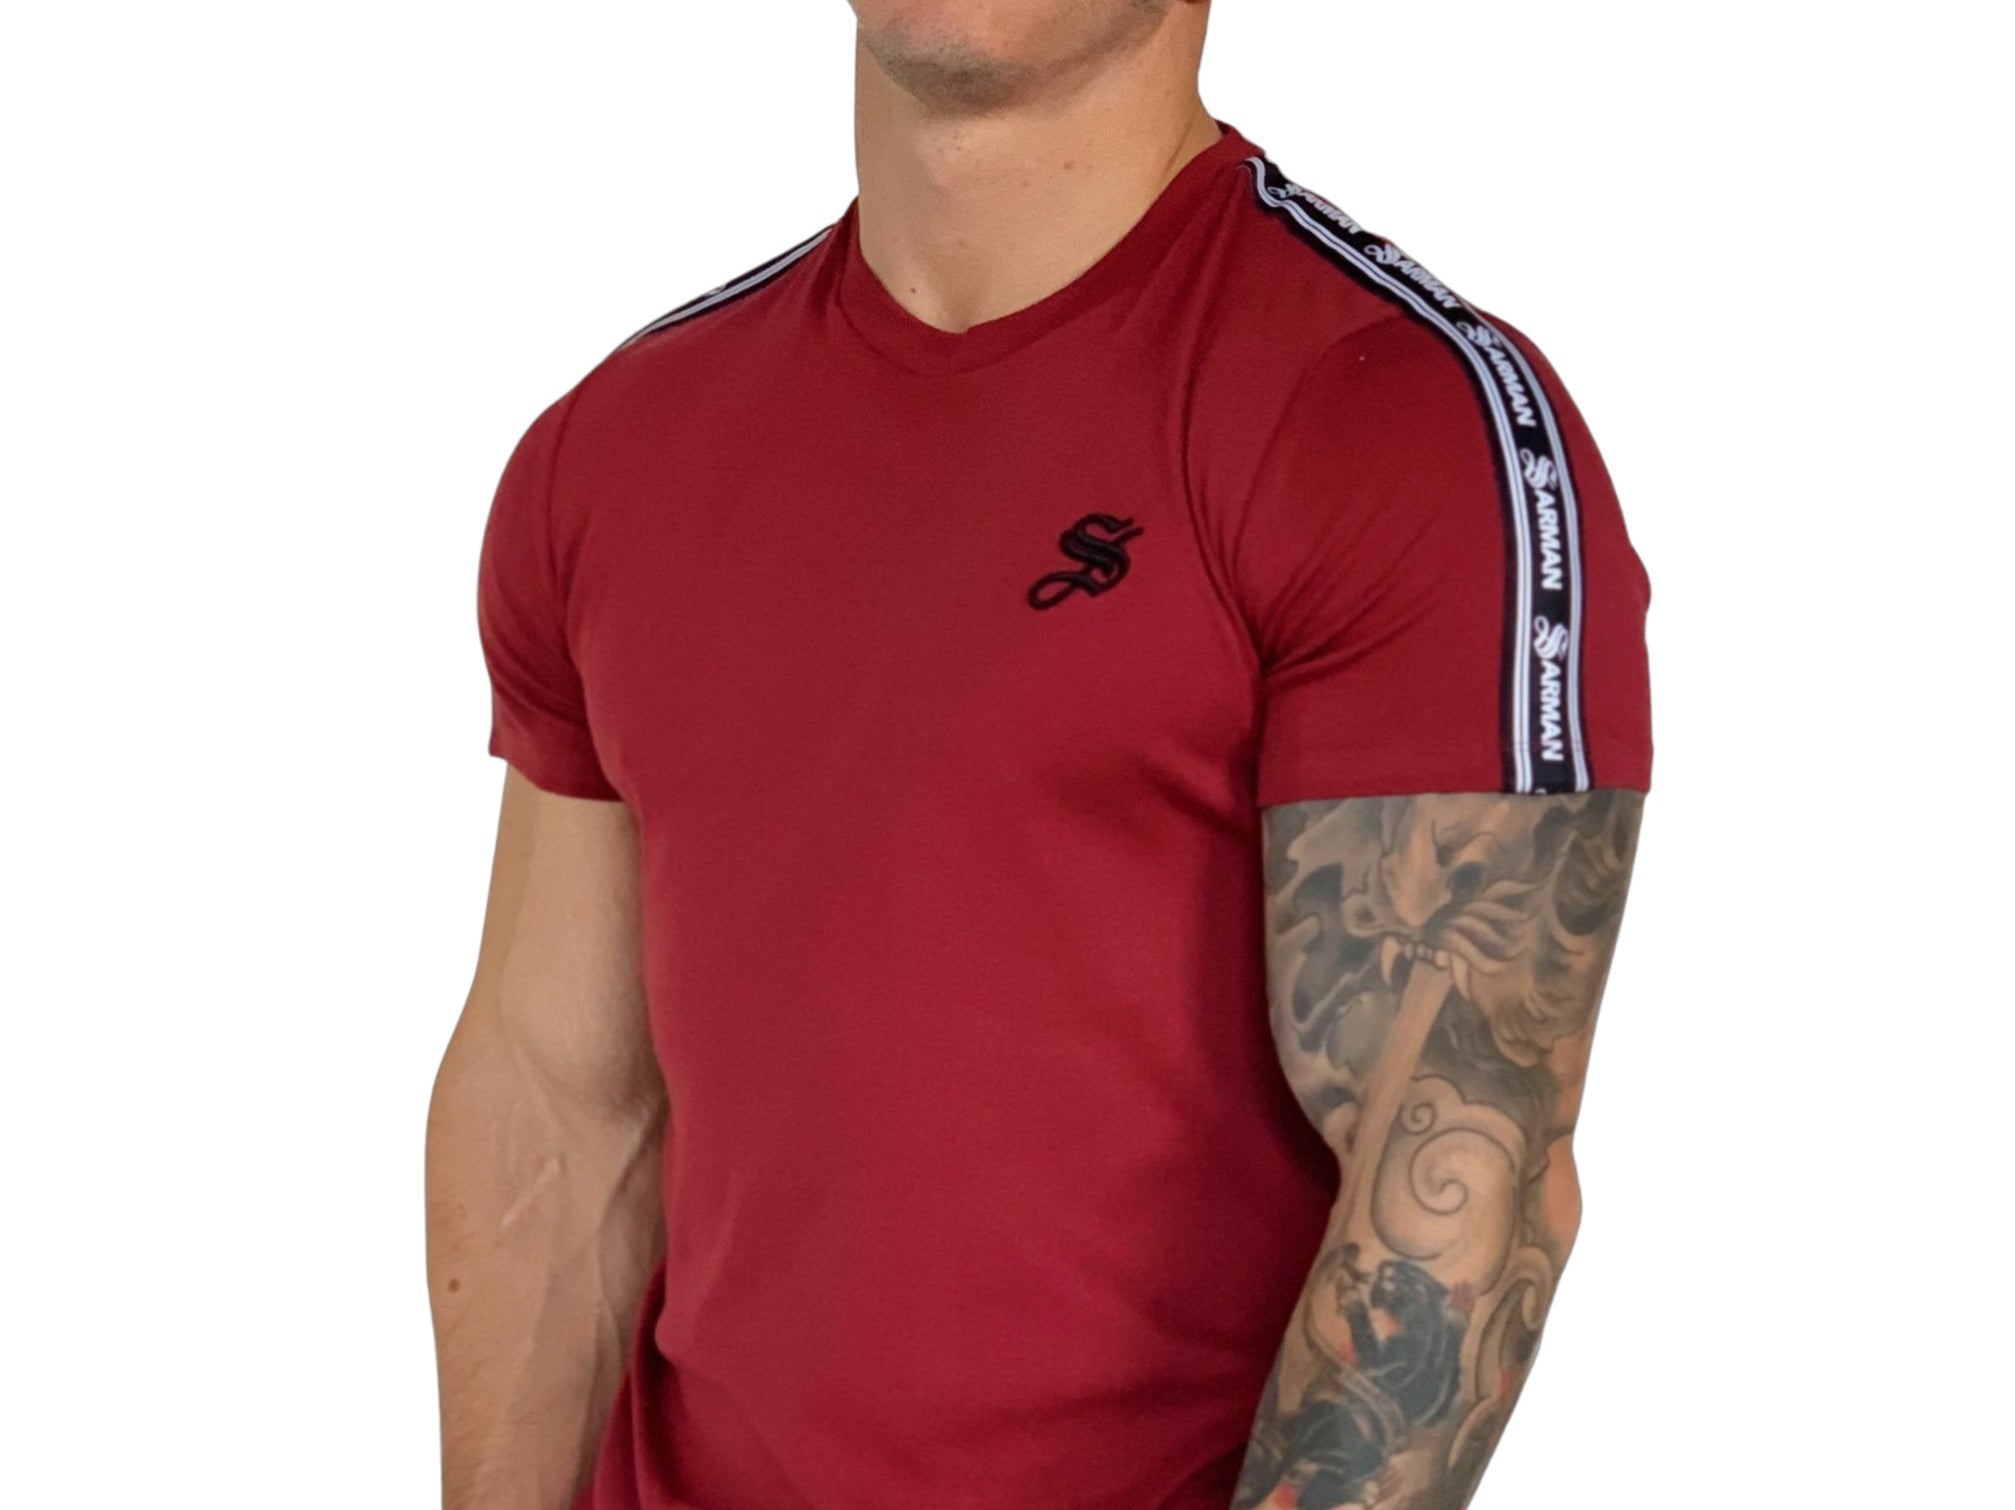 Filly - Burgundy T-shirt for Men - Sarman Fashion - Wholesale Clothing Fashion Brand for Men from Canada